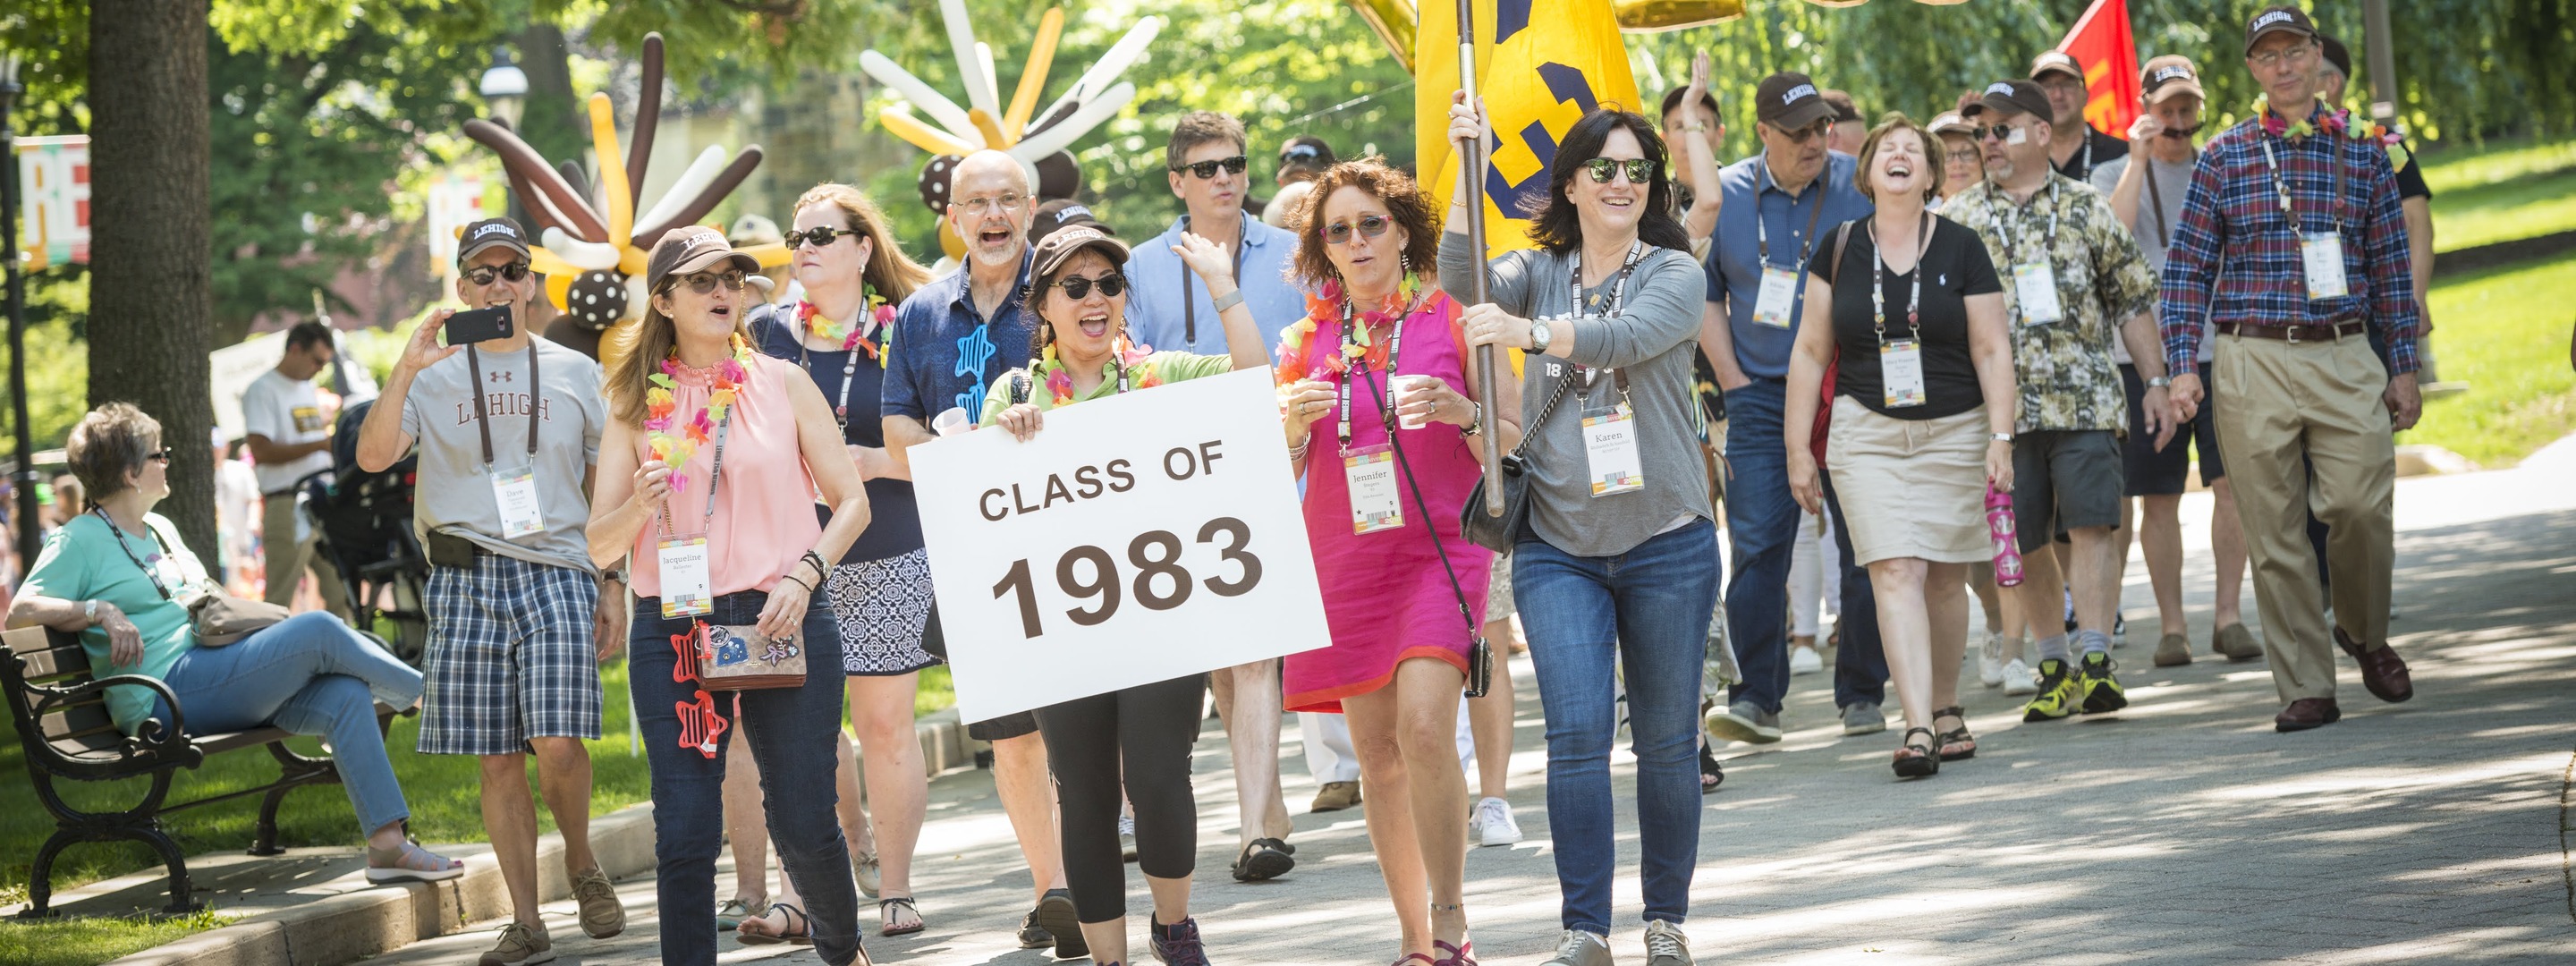 Picture of Lehigh Alumni walking on Lehigh's campus, holding a sign "Class of 1983"